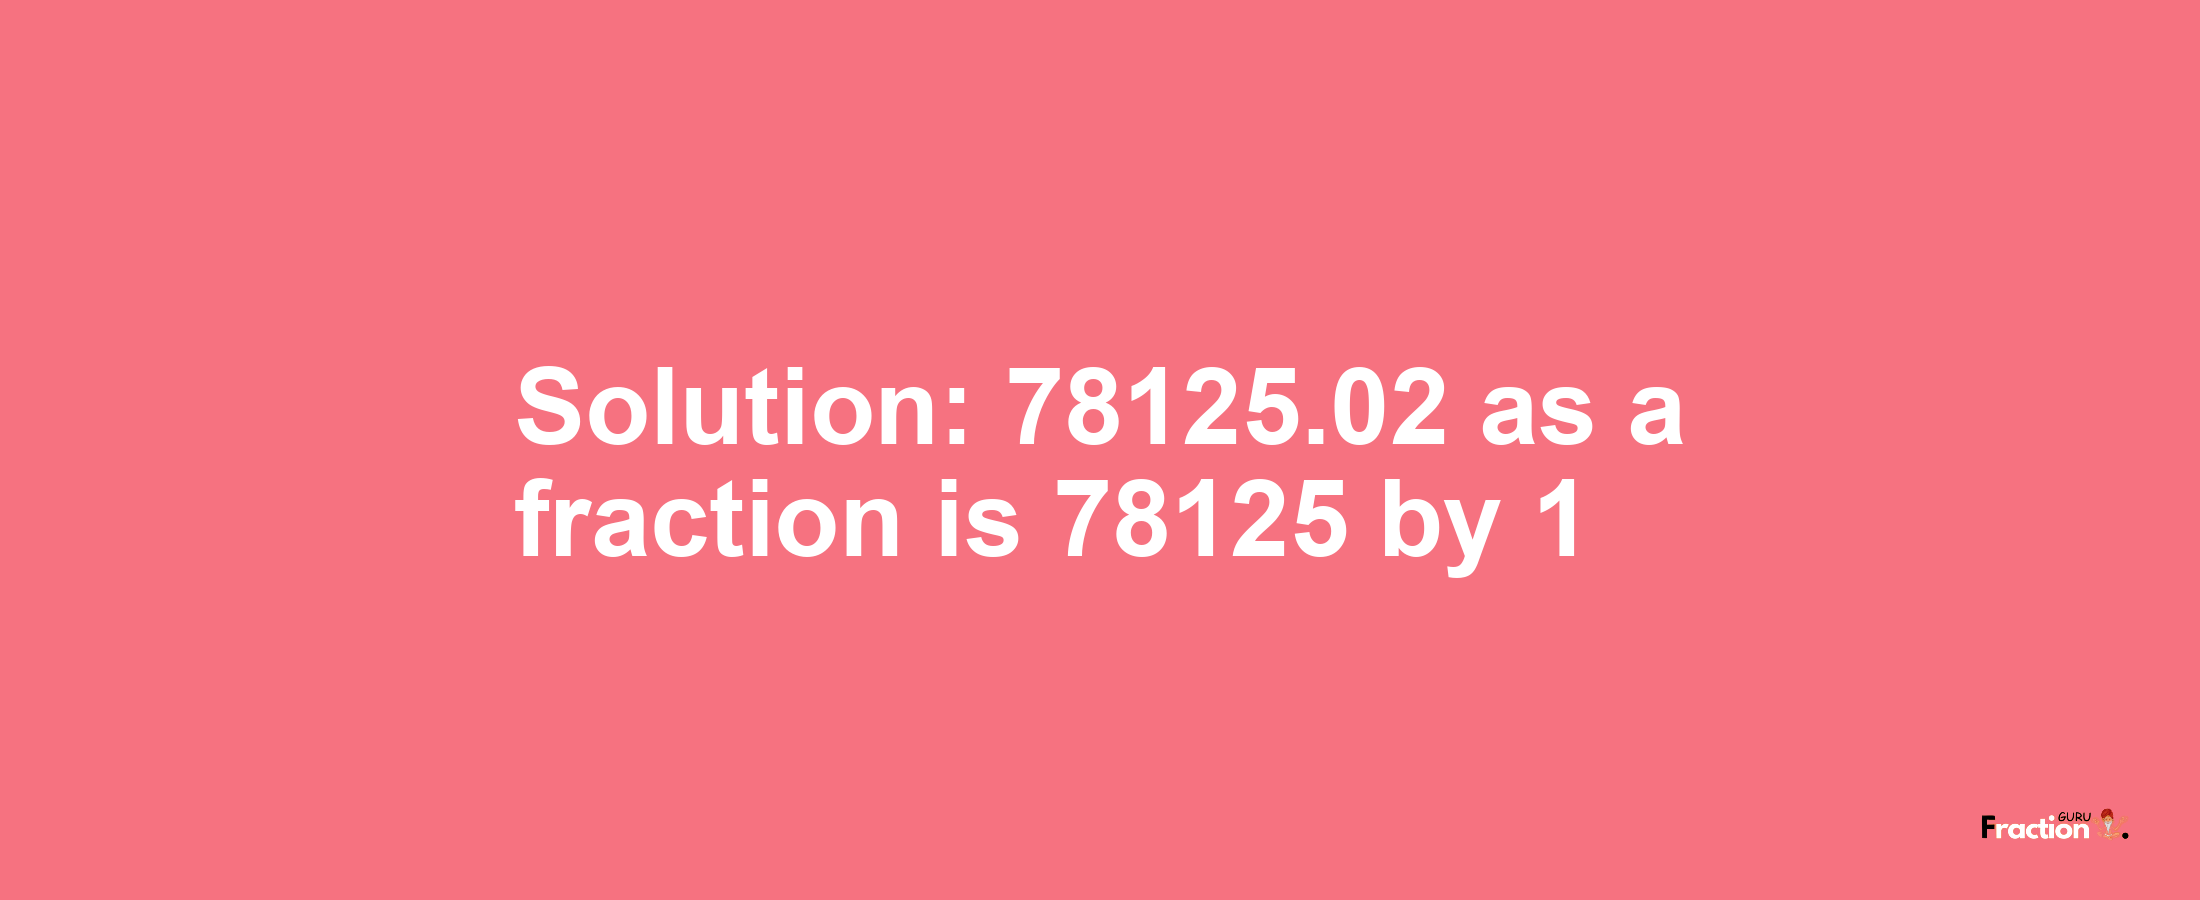 Solution:78125.02 as a fraction is 78125/1